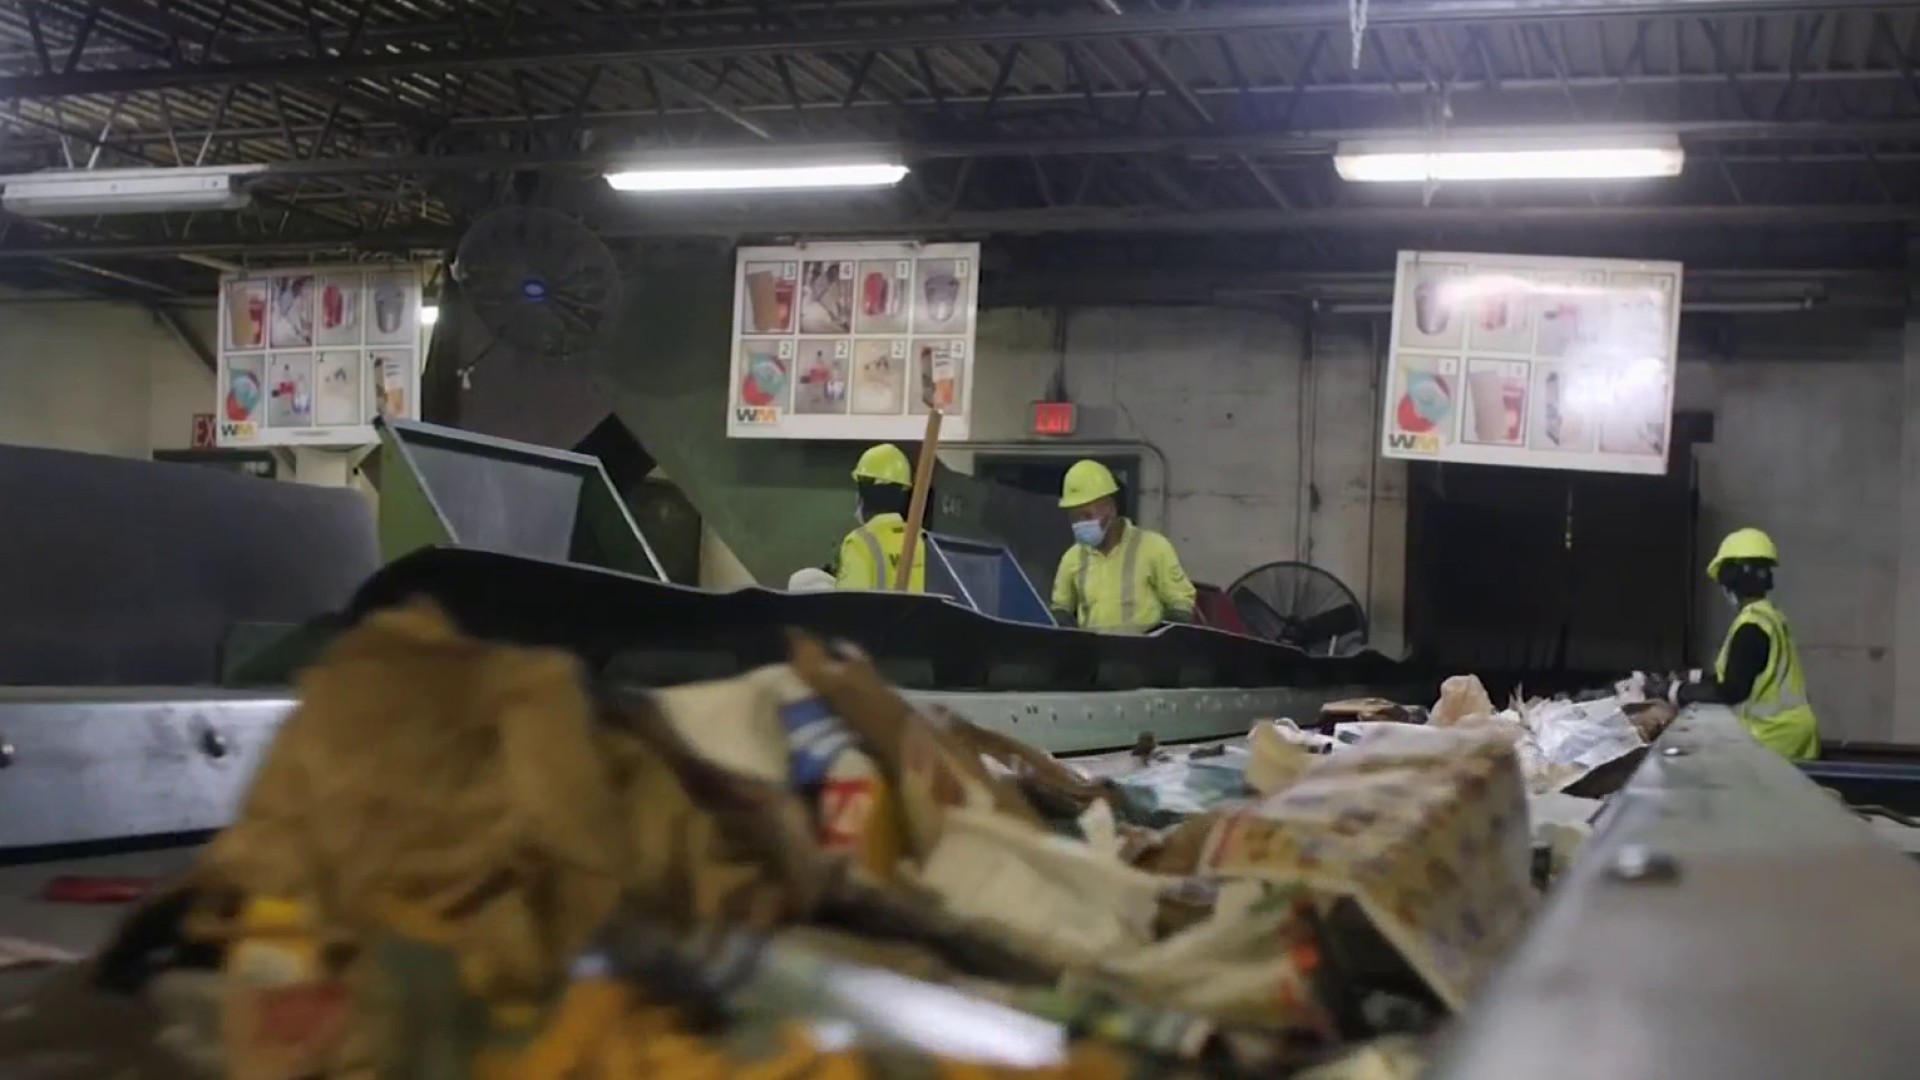 Redoing Recycling: How South Florida Cities Are Adapting to Change